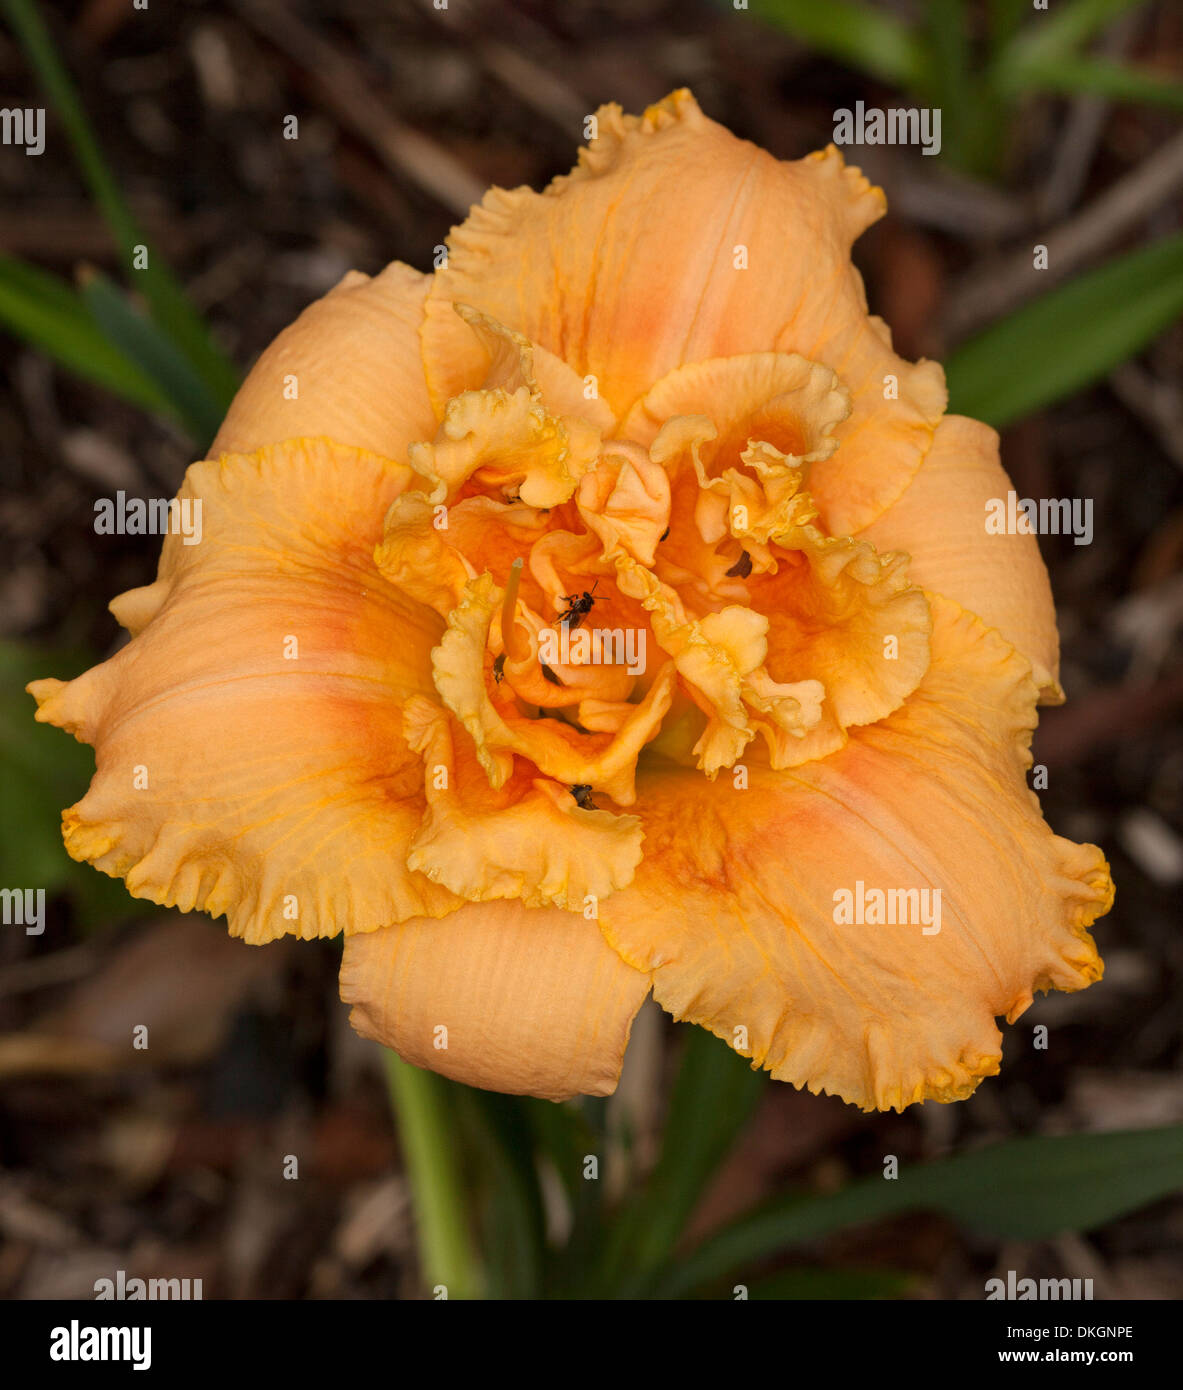 Spectacular perfumed apricot / orange double daylily flower with frilly edged petals - Hemerocallis 'Jerry Pate Williams' Stock Photo